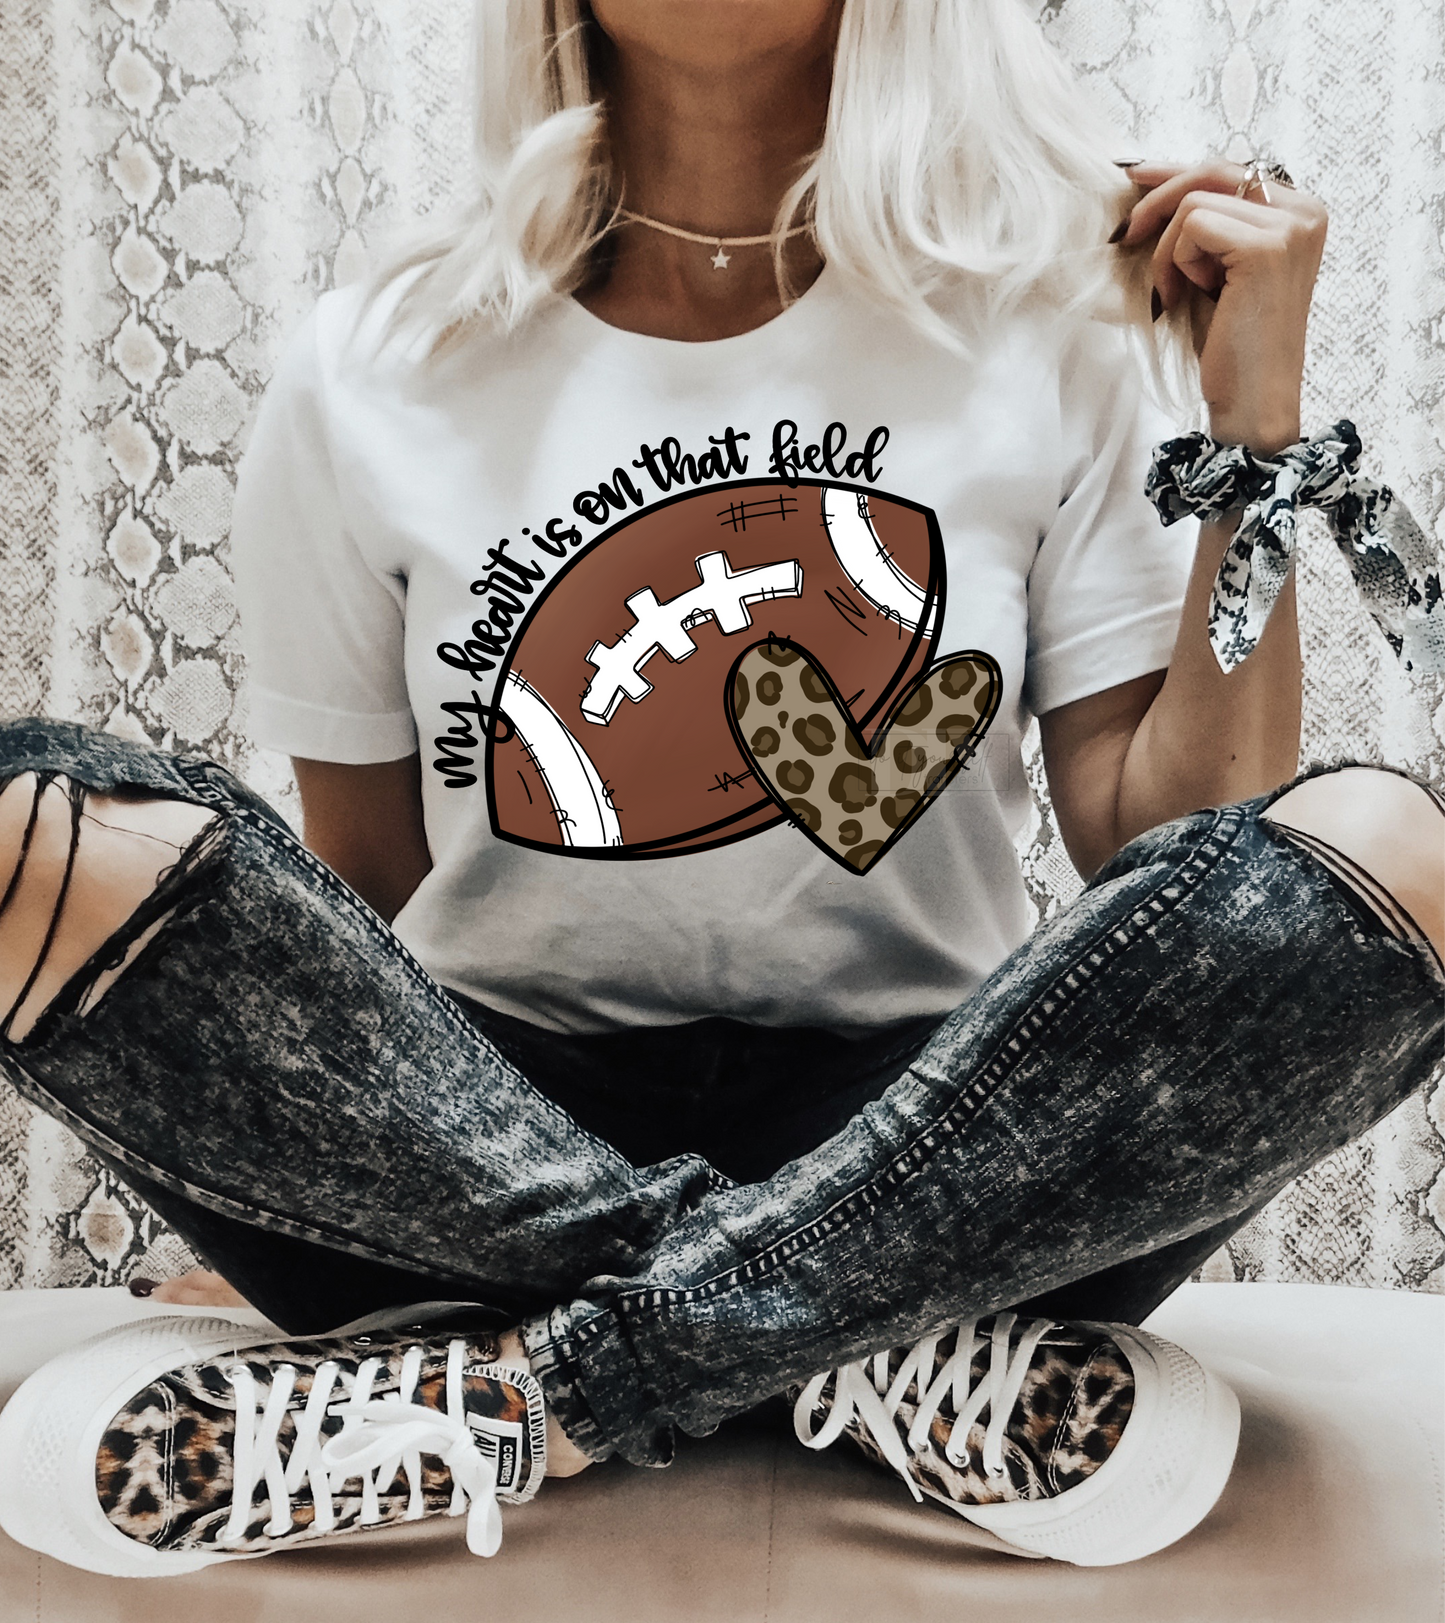 My Heart is on that field FOOTBALL leopard  size ADULT 10.5x12.5 DTF TRANSFERPRINT TO ORDER